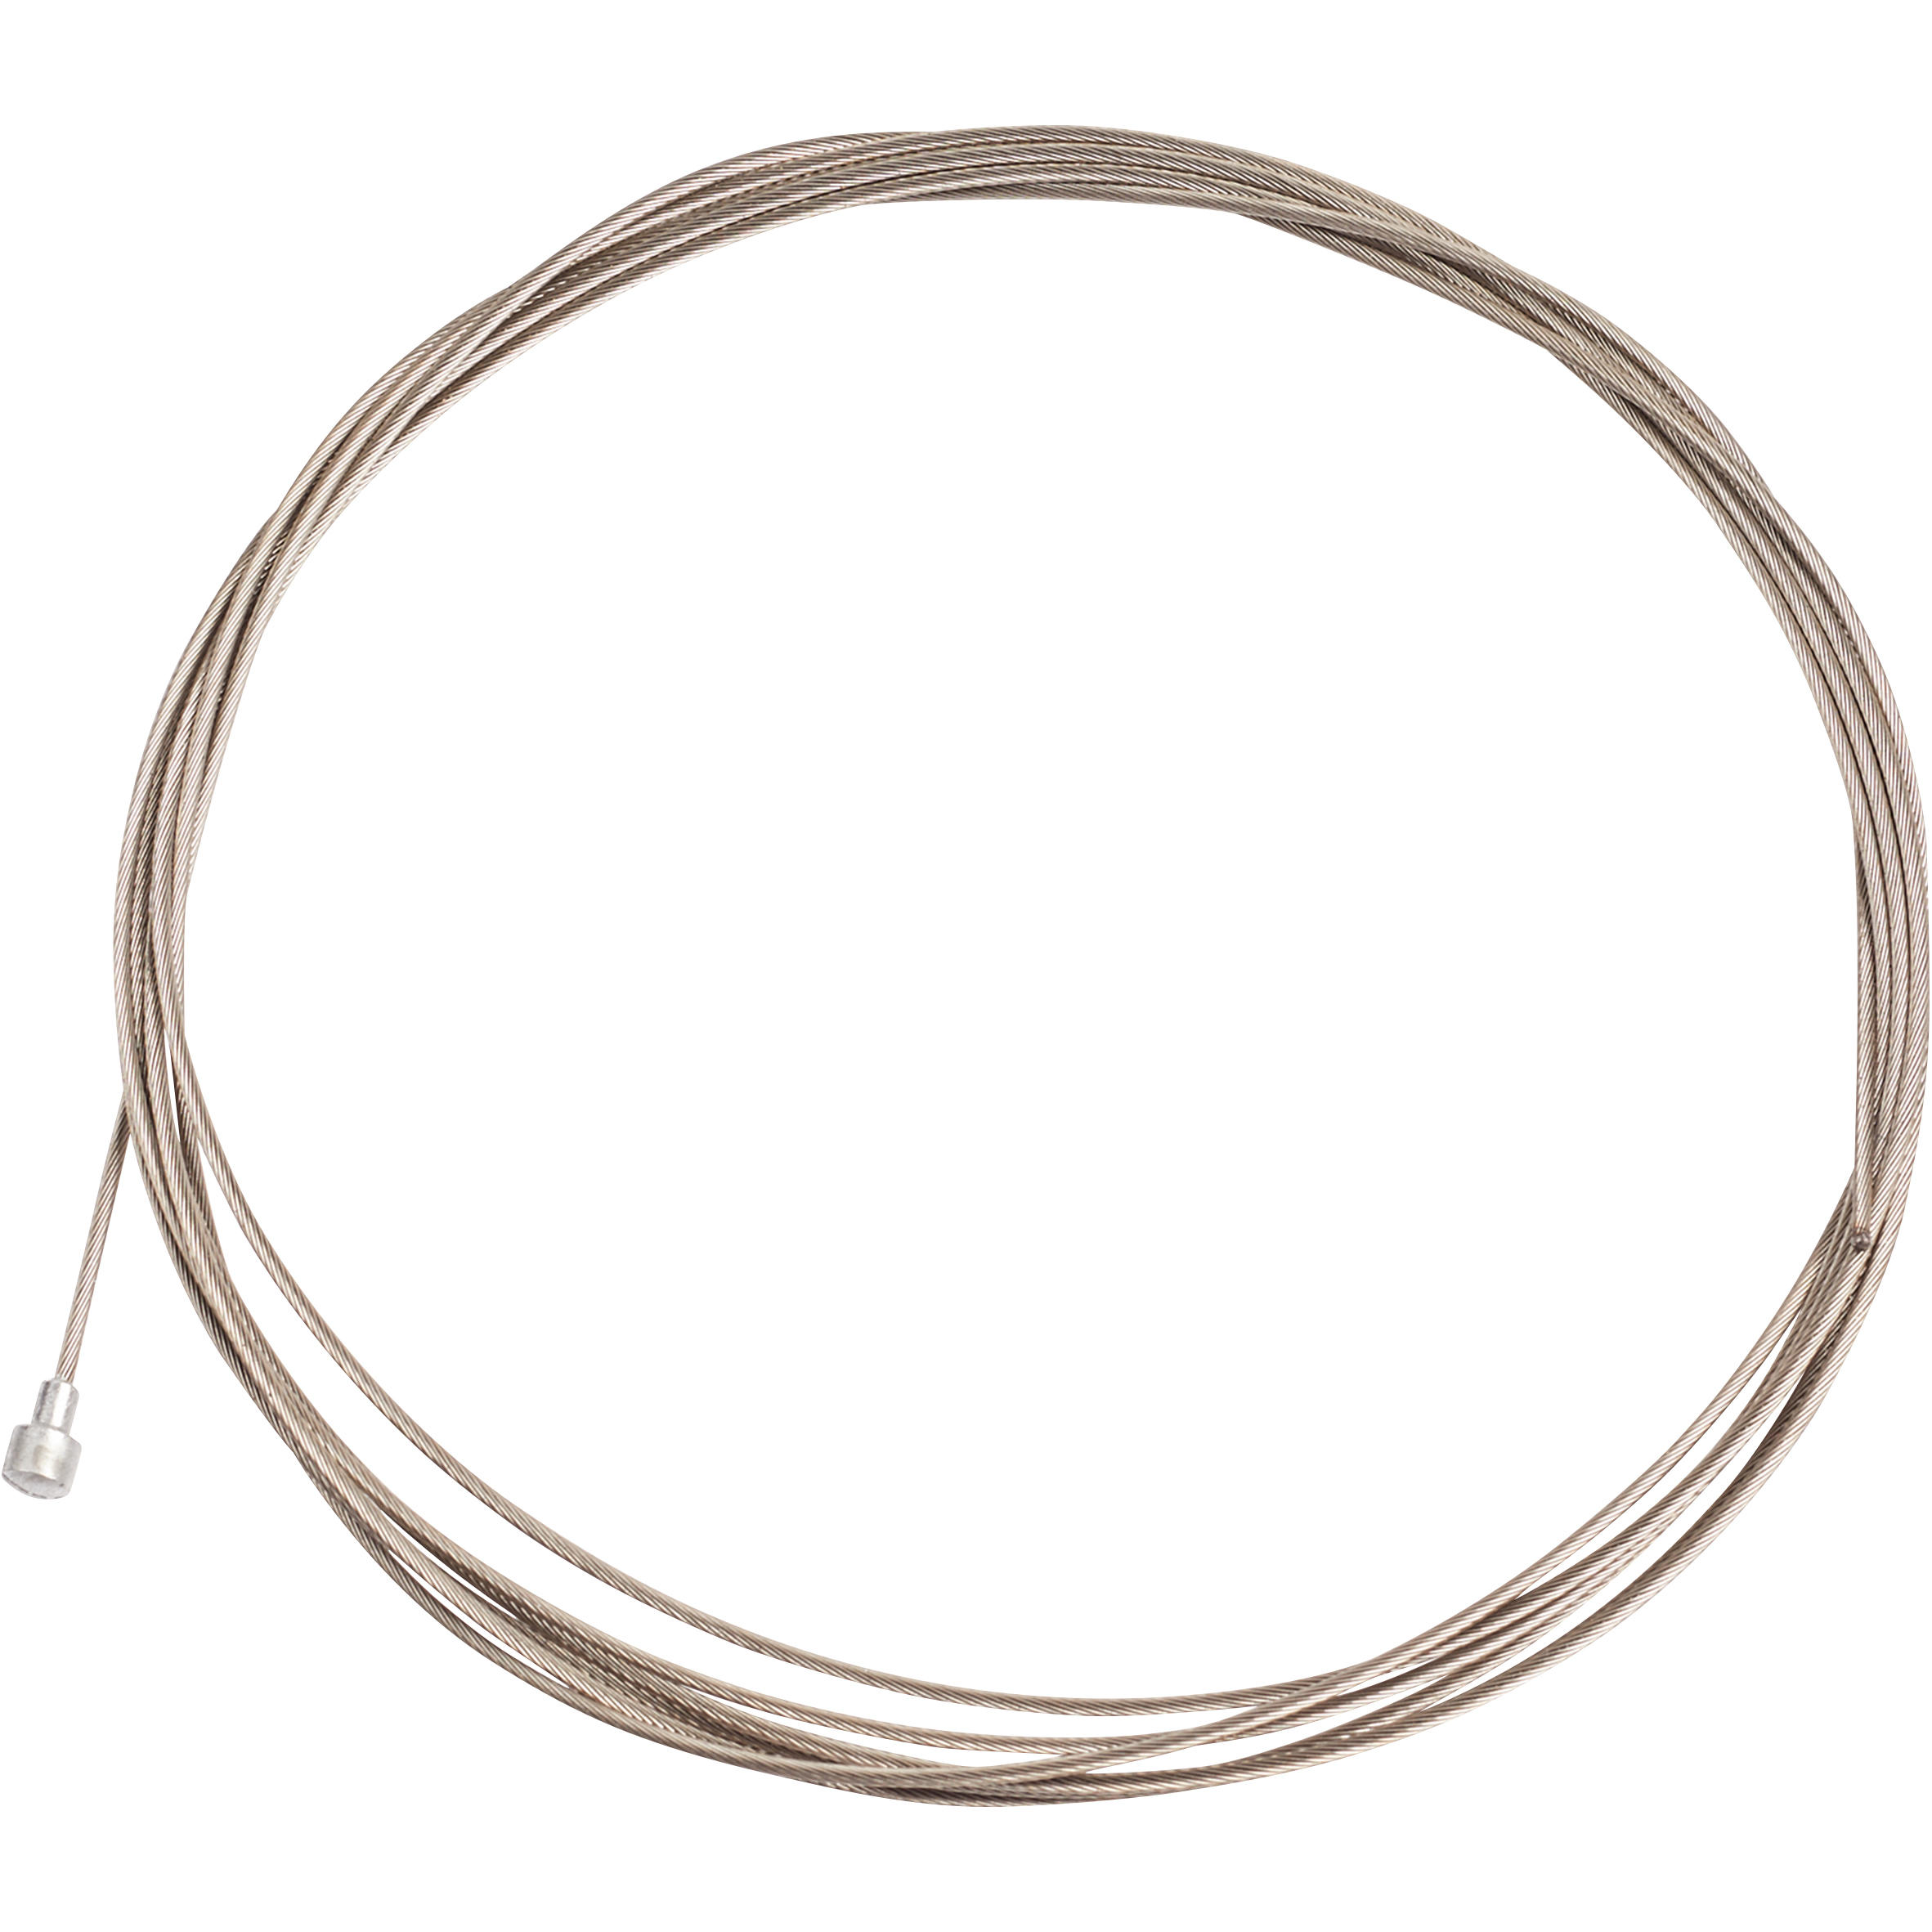 btwin brake cable